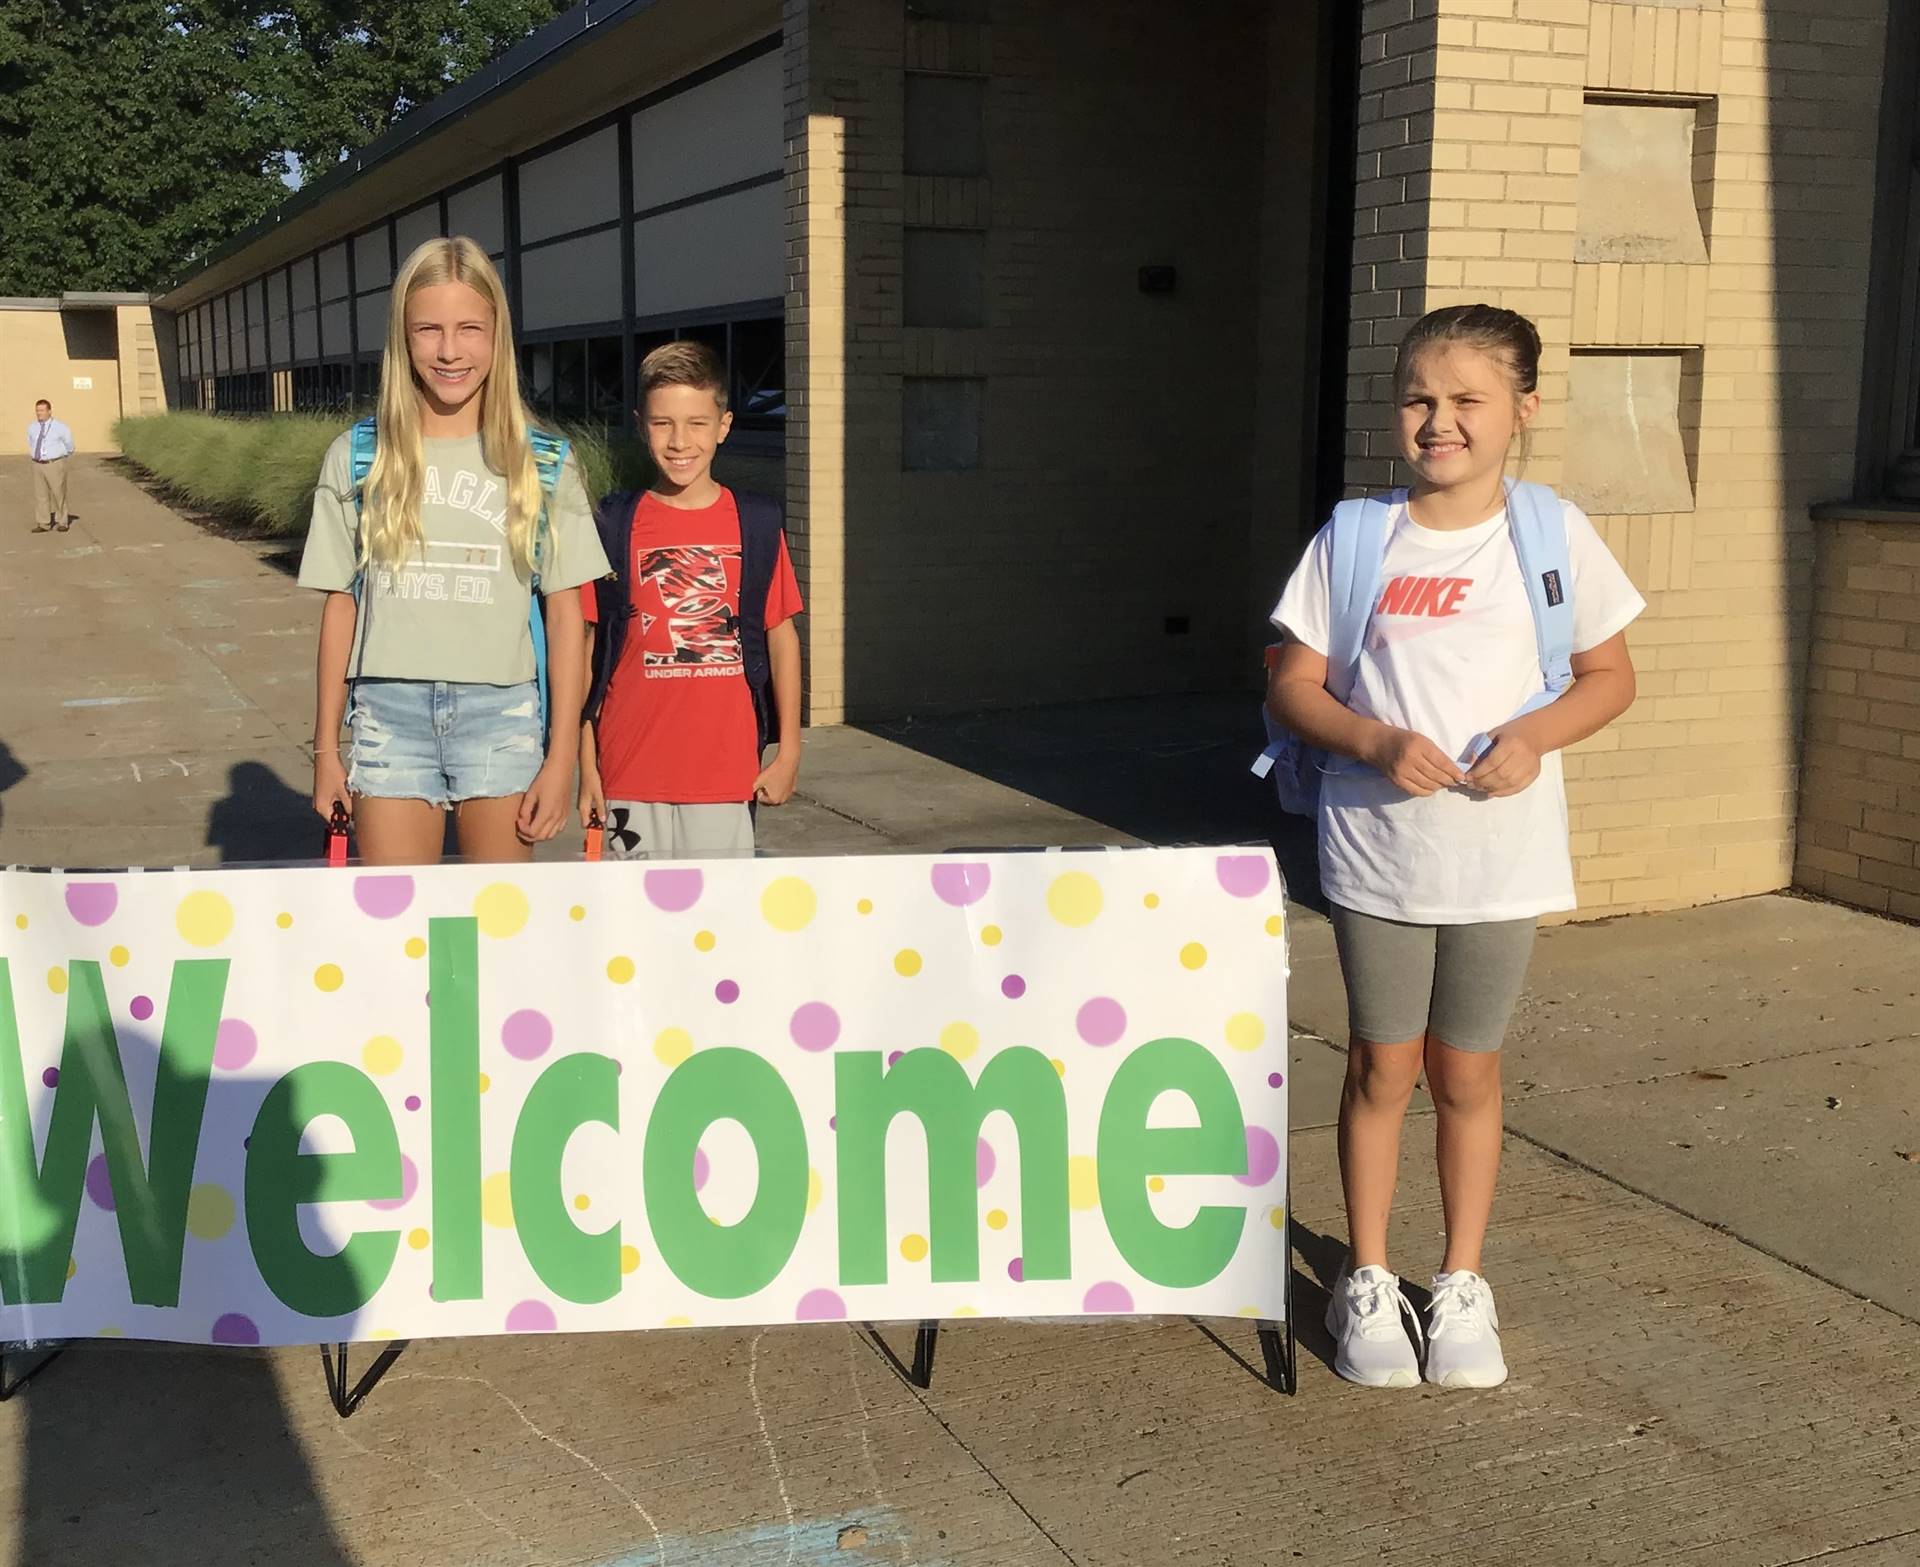 Students and Welcome banner